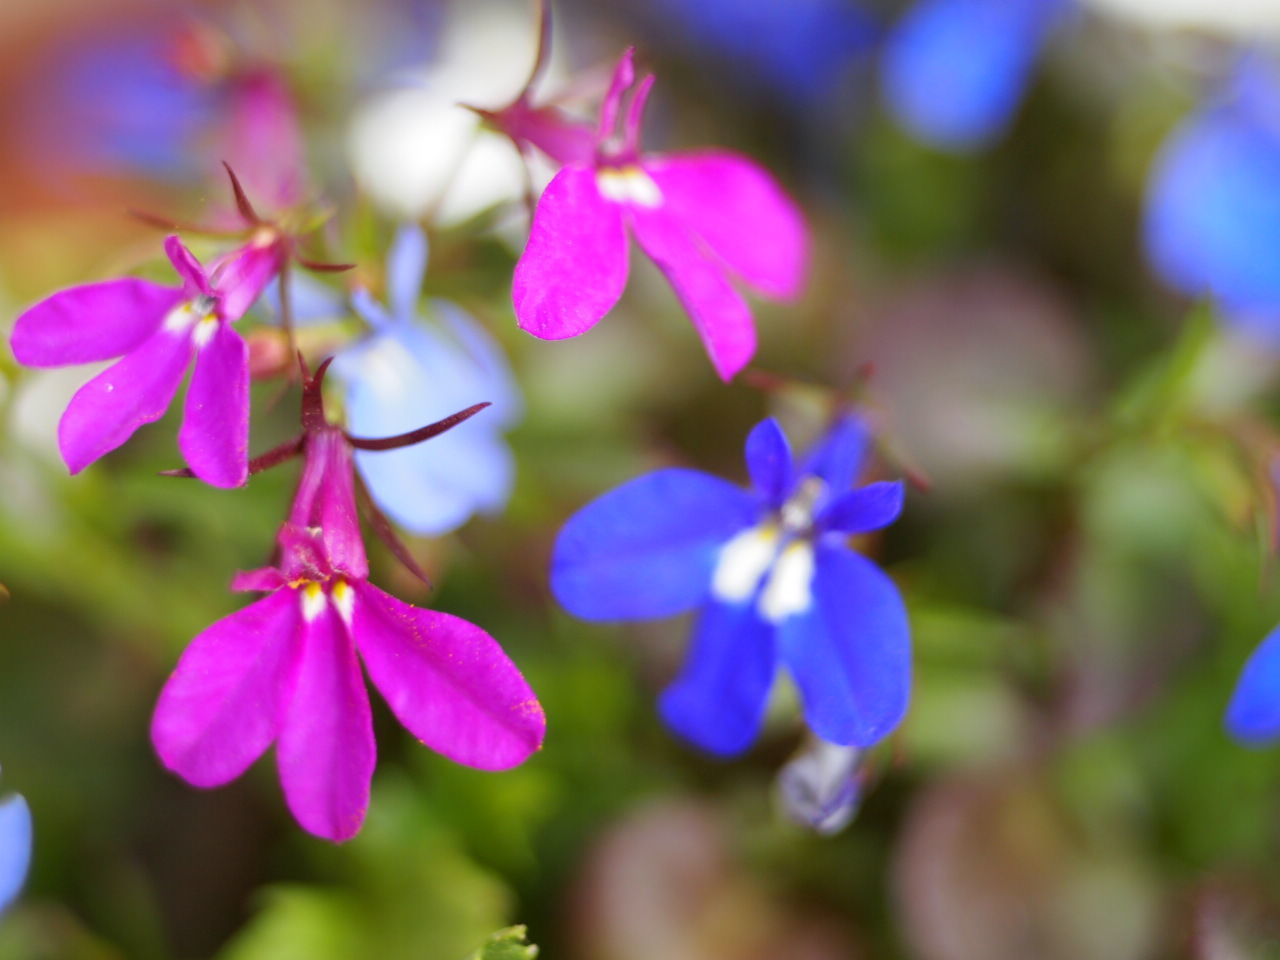 Close-up of purple and blue flowers blooming outdoors